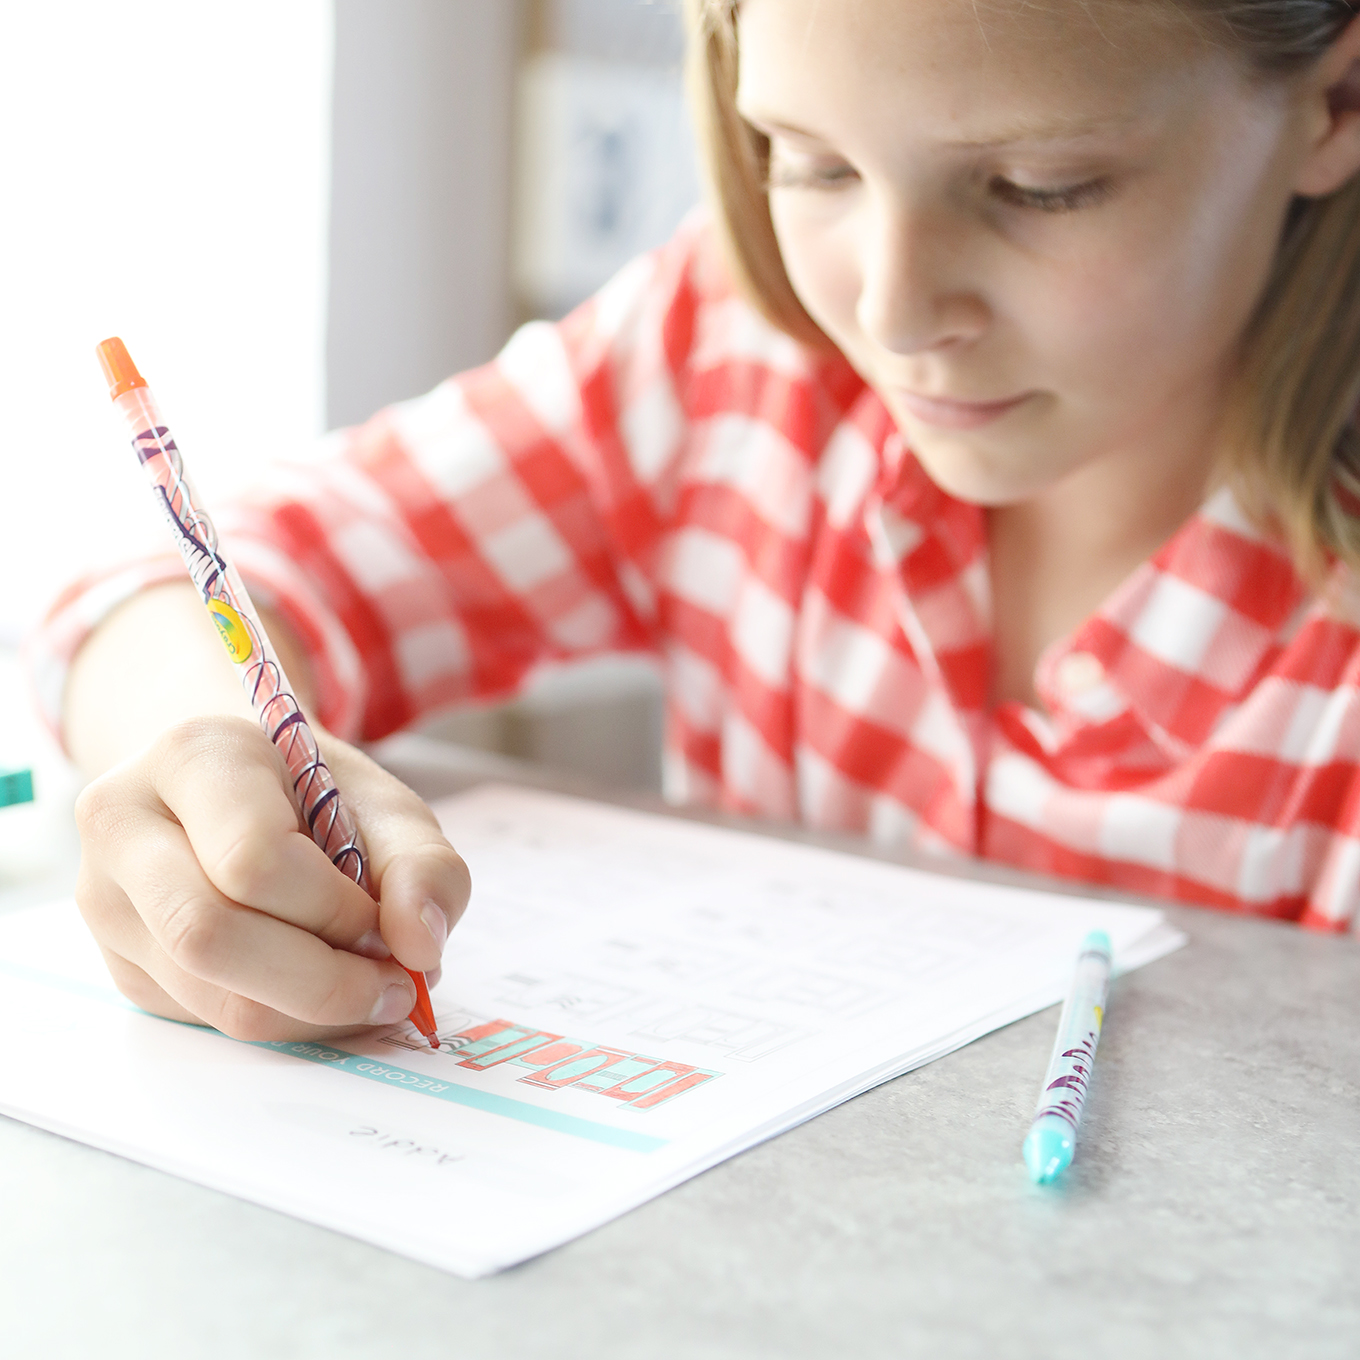 Mom's Summer Reading Challenge is a fun way to get your kids excited about reading all the books this summer! Use our printable reading log and the ideas in this post to encourage your kids to meet their reading goals.